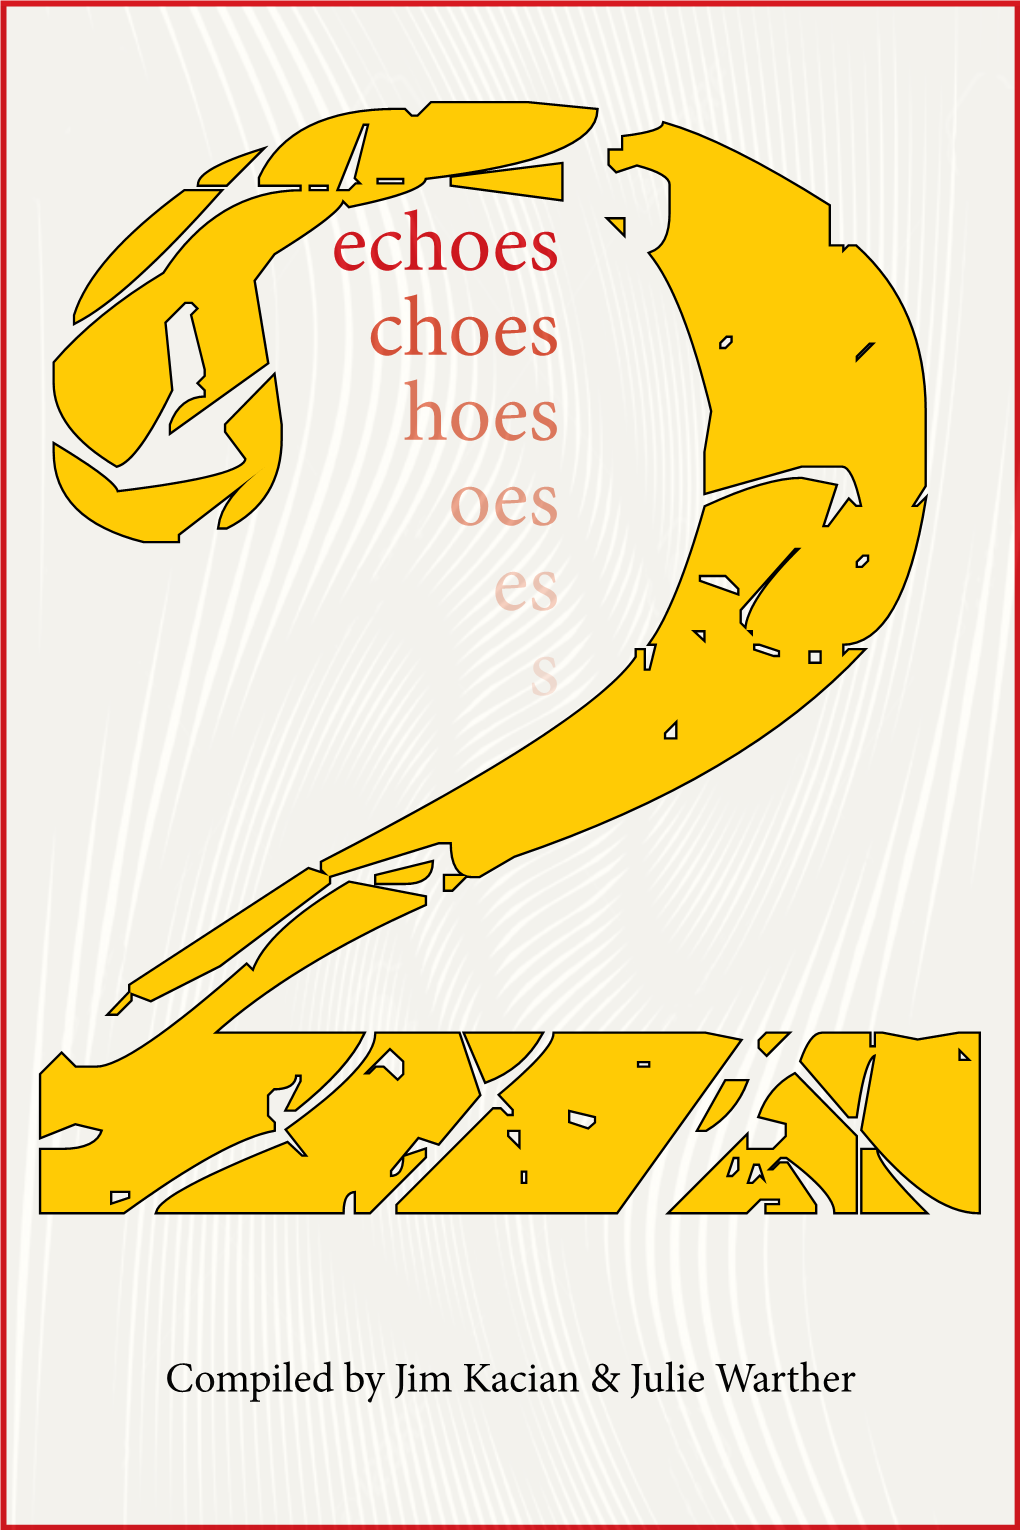 Echoes Choes Hoes Oes Es S 2Compiled by Jim Kacian & Julie Warther Echoes 2 Red Moon Press © 2018 Poems Are Copyrighted in the Names of the Individual Poet